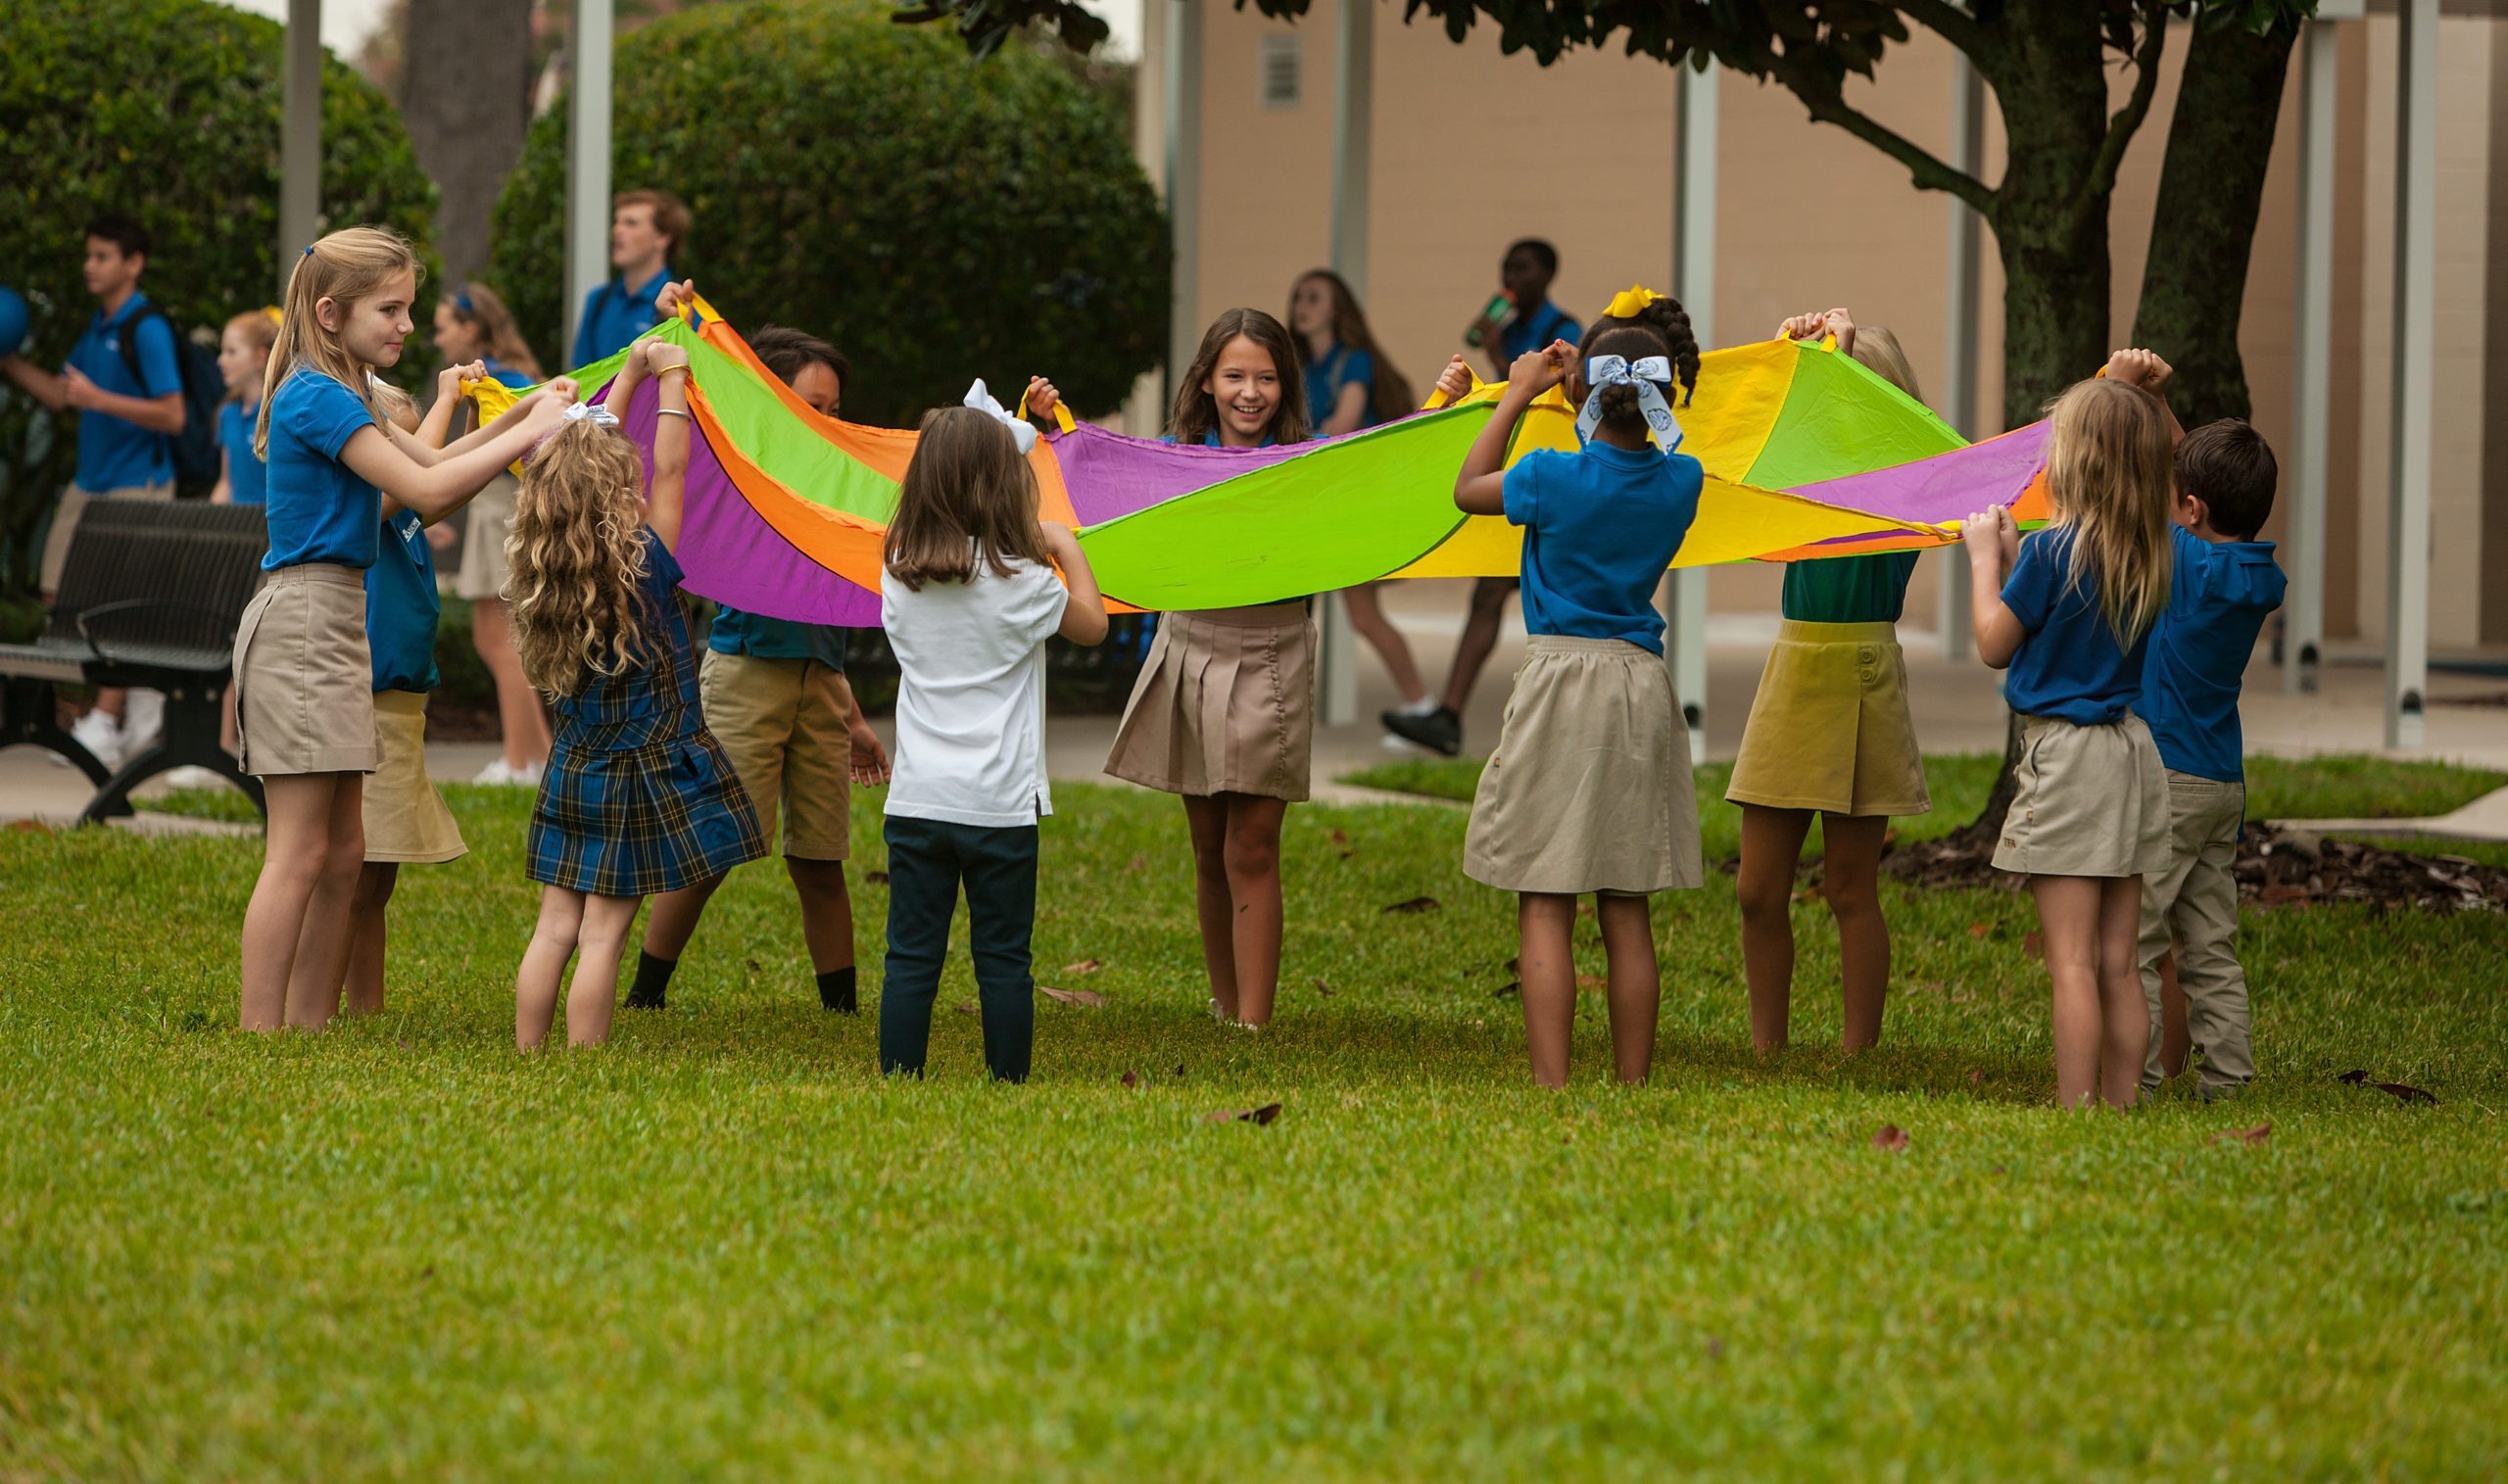 Several young children in a playground holding up a multi-colored parachute